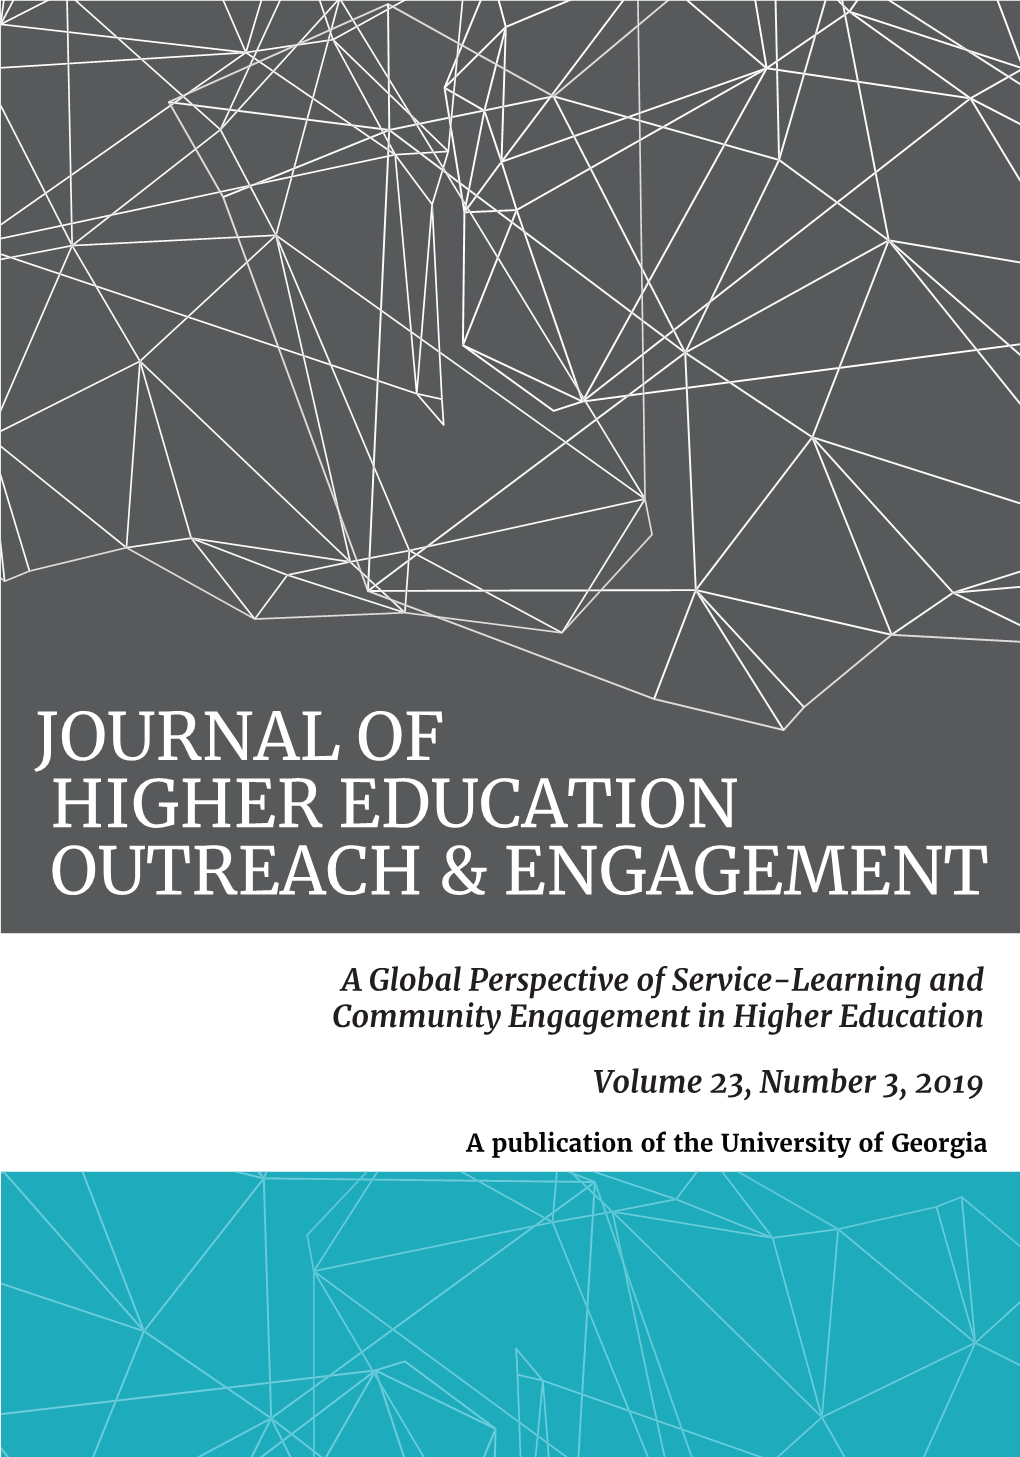 Journal of Higher Education Outreach & Engagement